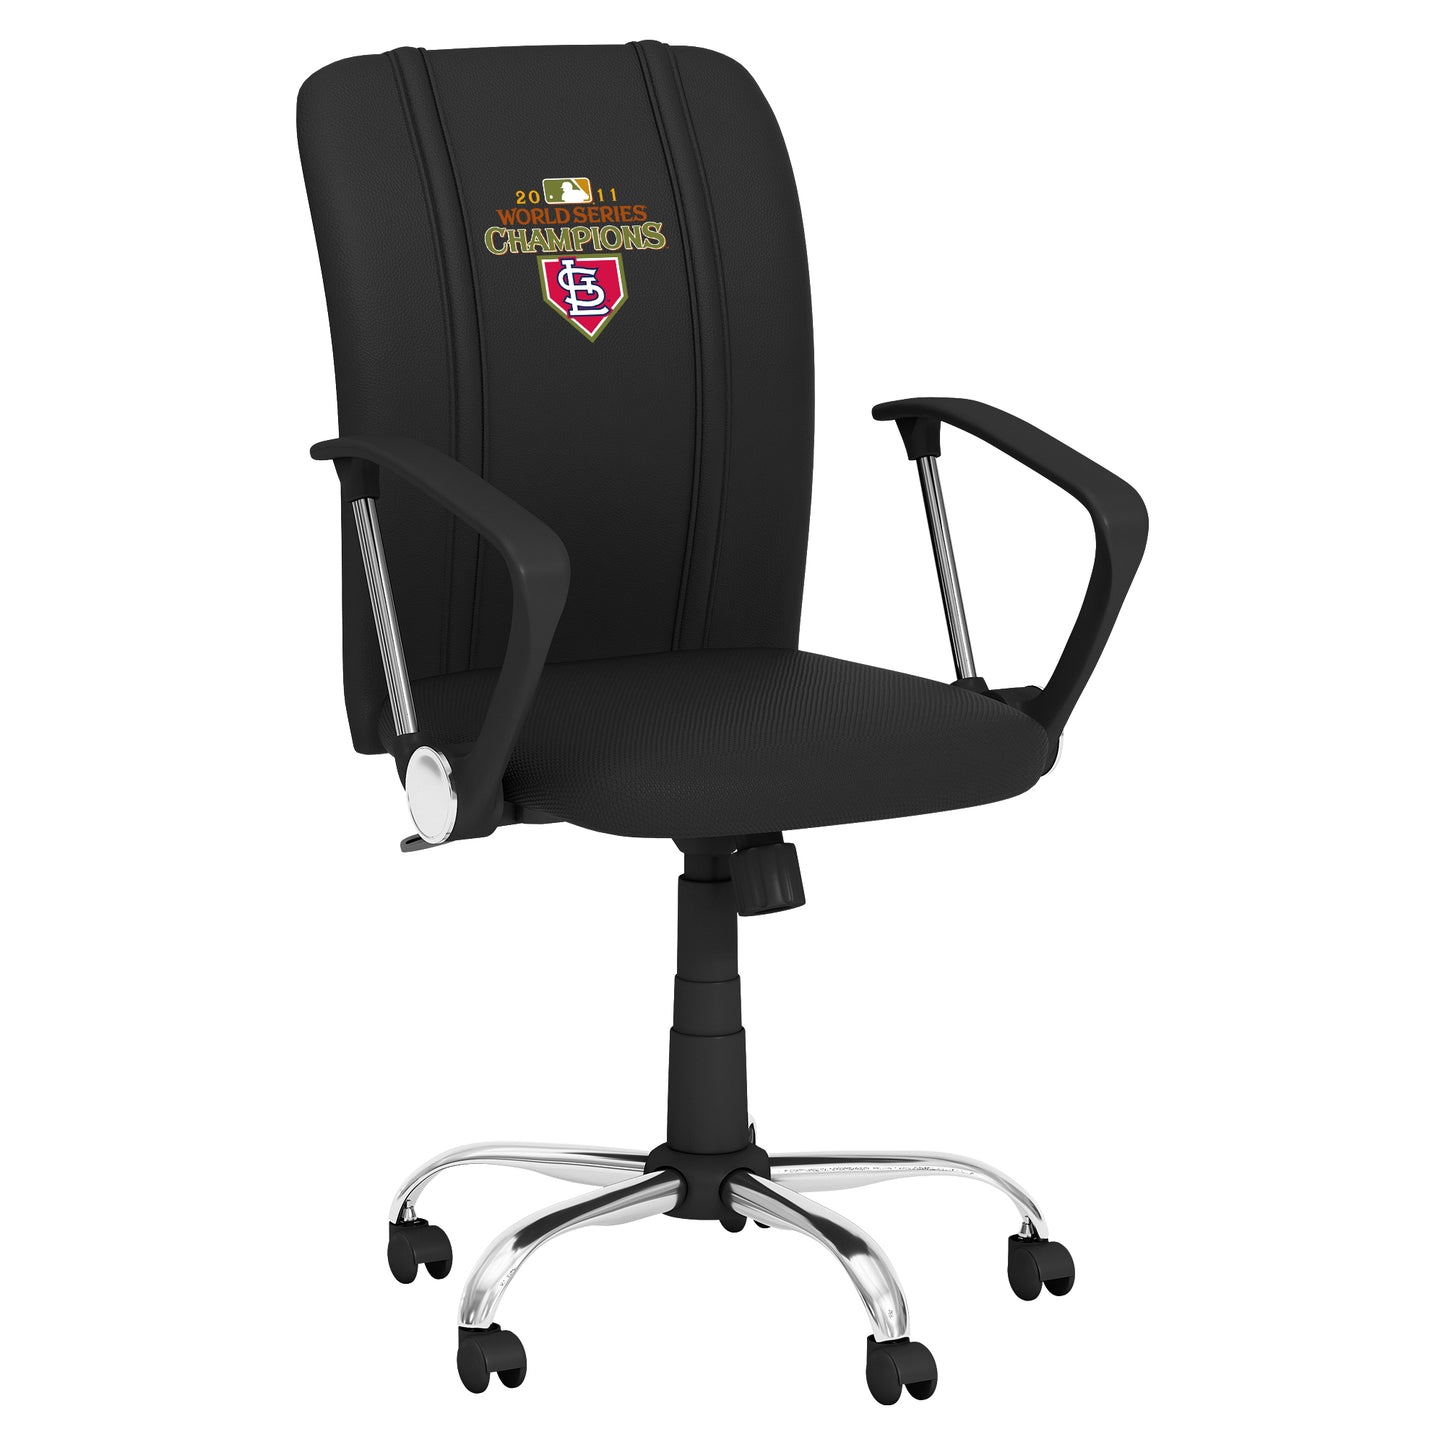 Curve Task Chair with St Louis Cardinals Champs 2011